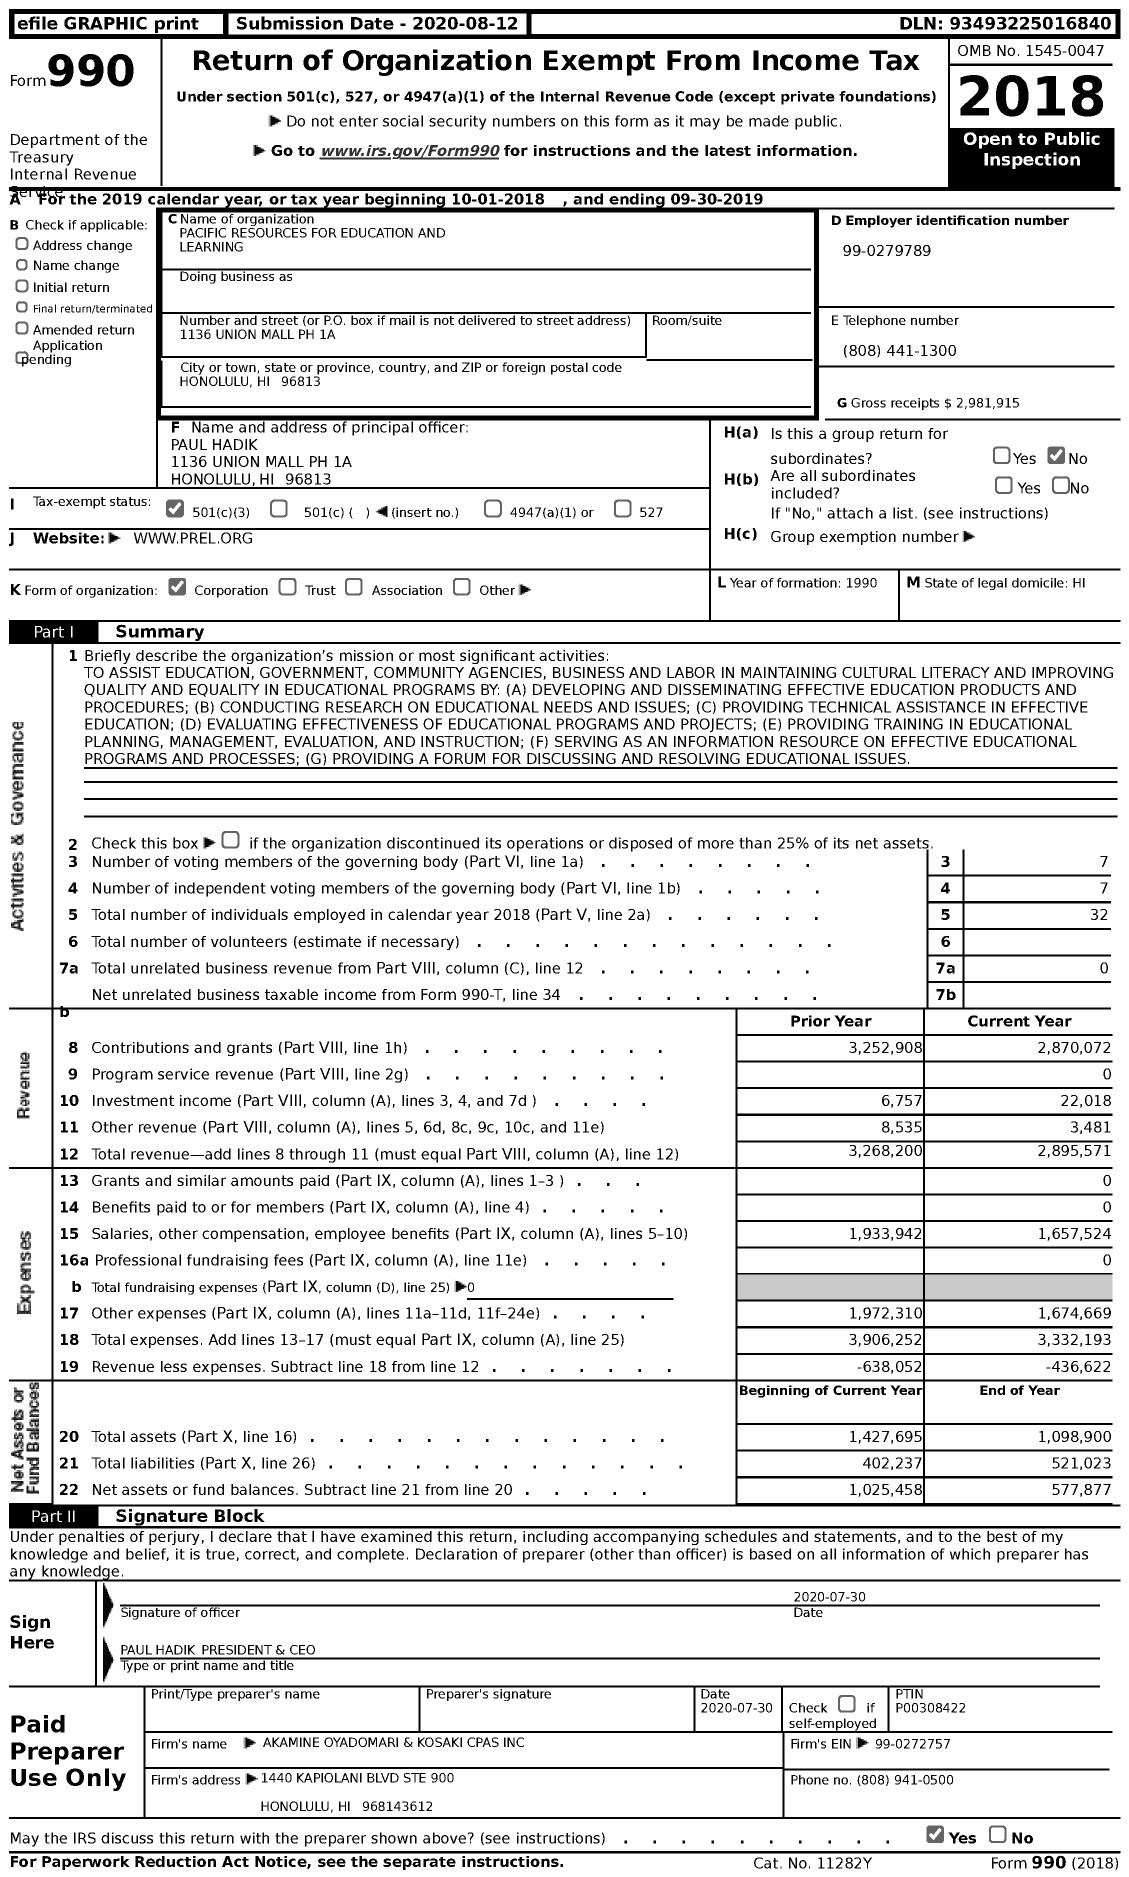 Image of first page of 2018 Form 990 for Pacific Resources for Education and Learning